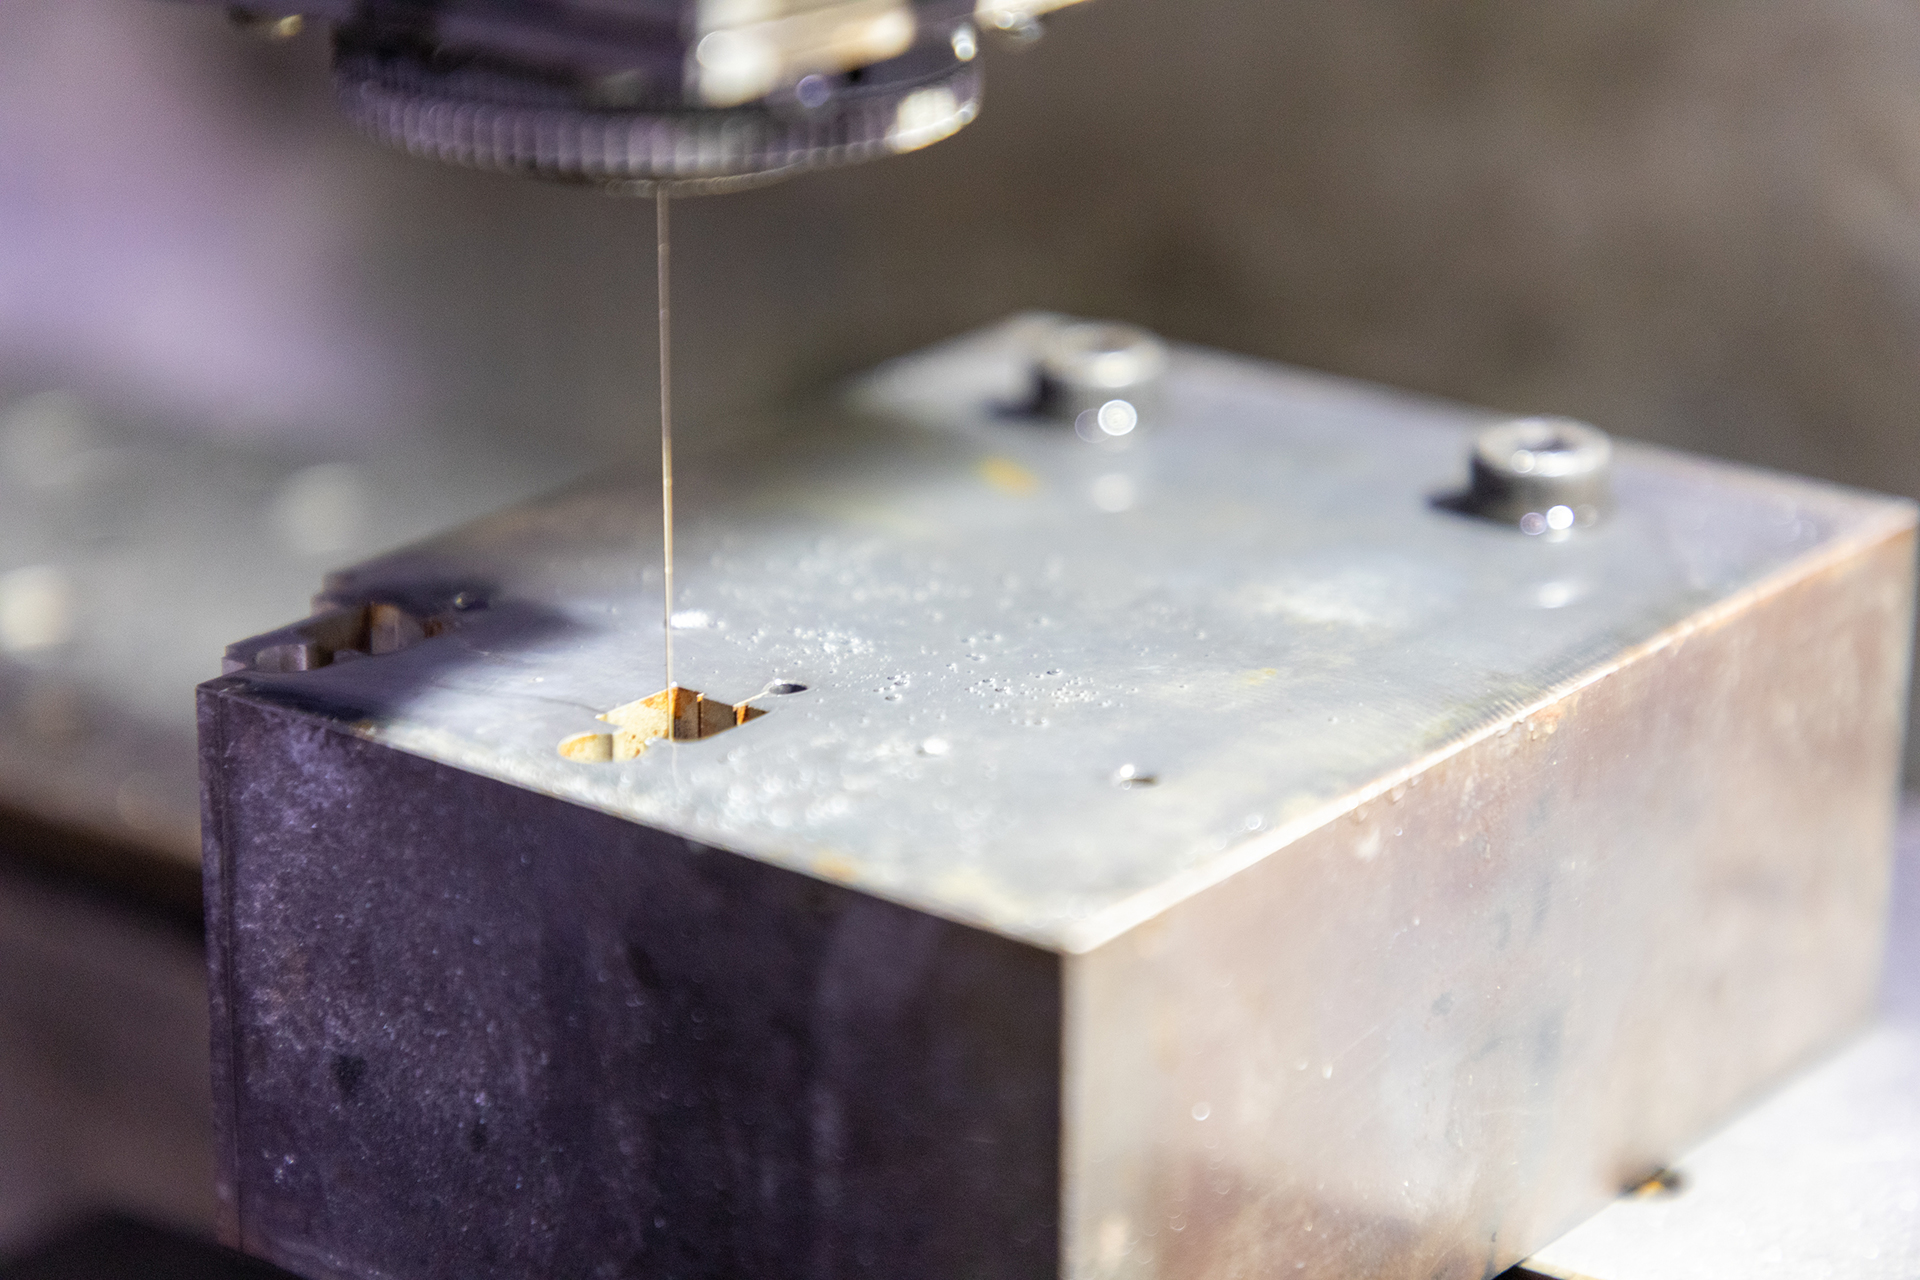 electrical discharge machining 